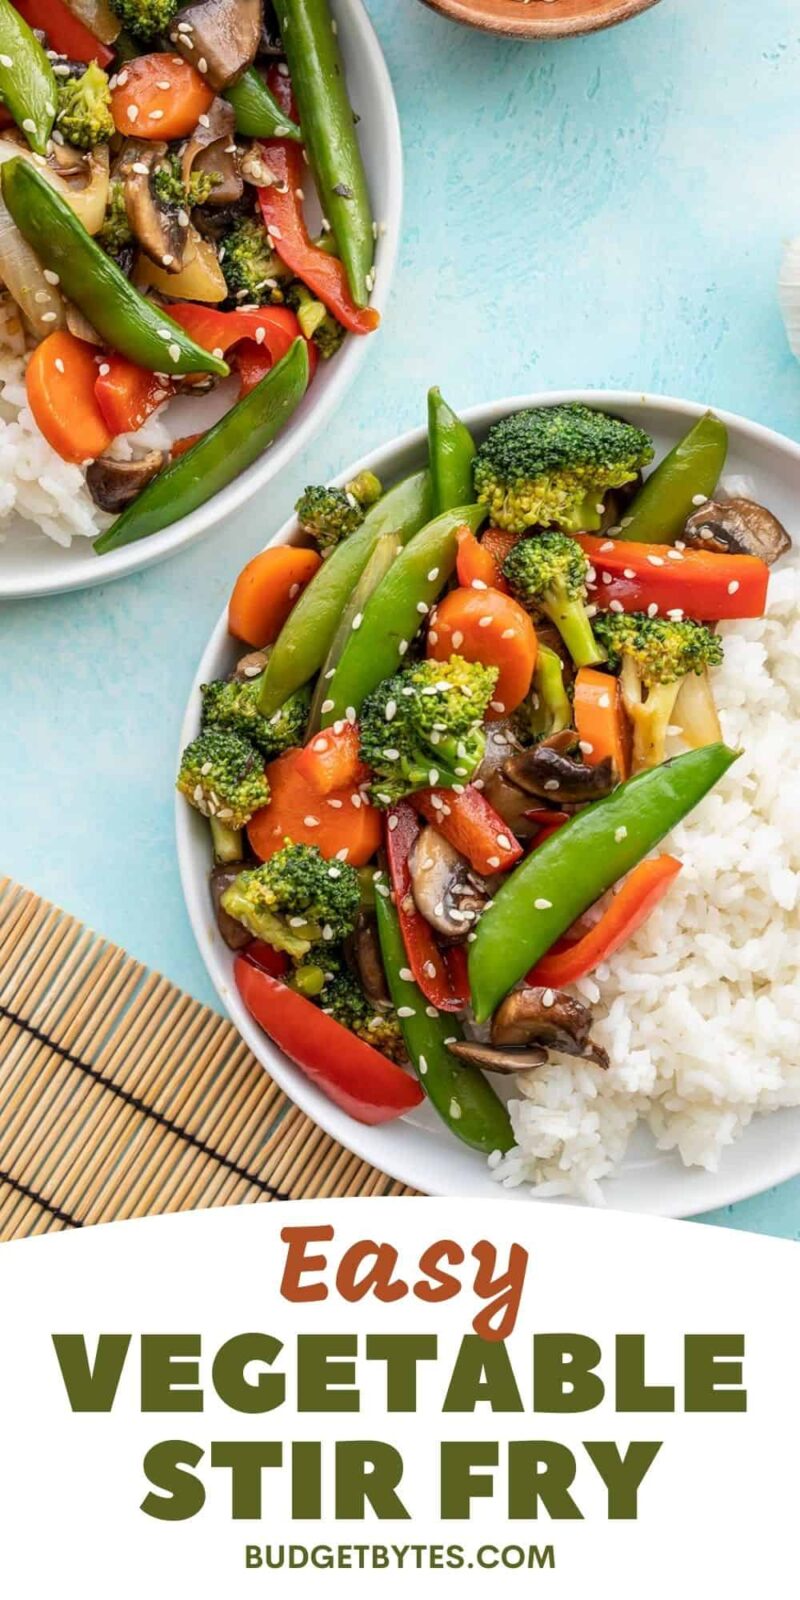 Two bowls of vegetable stir fry with rice, title text at the bottom